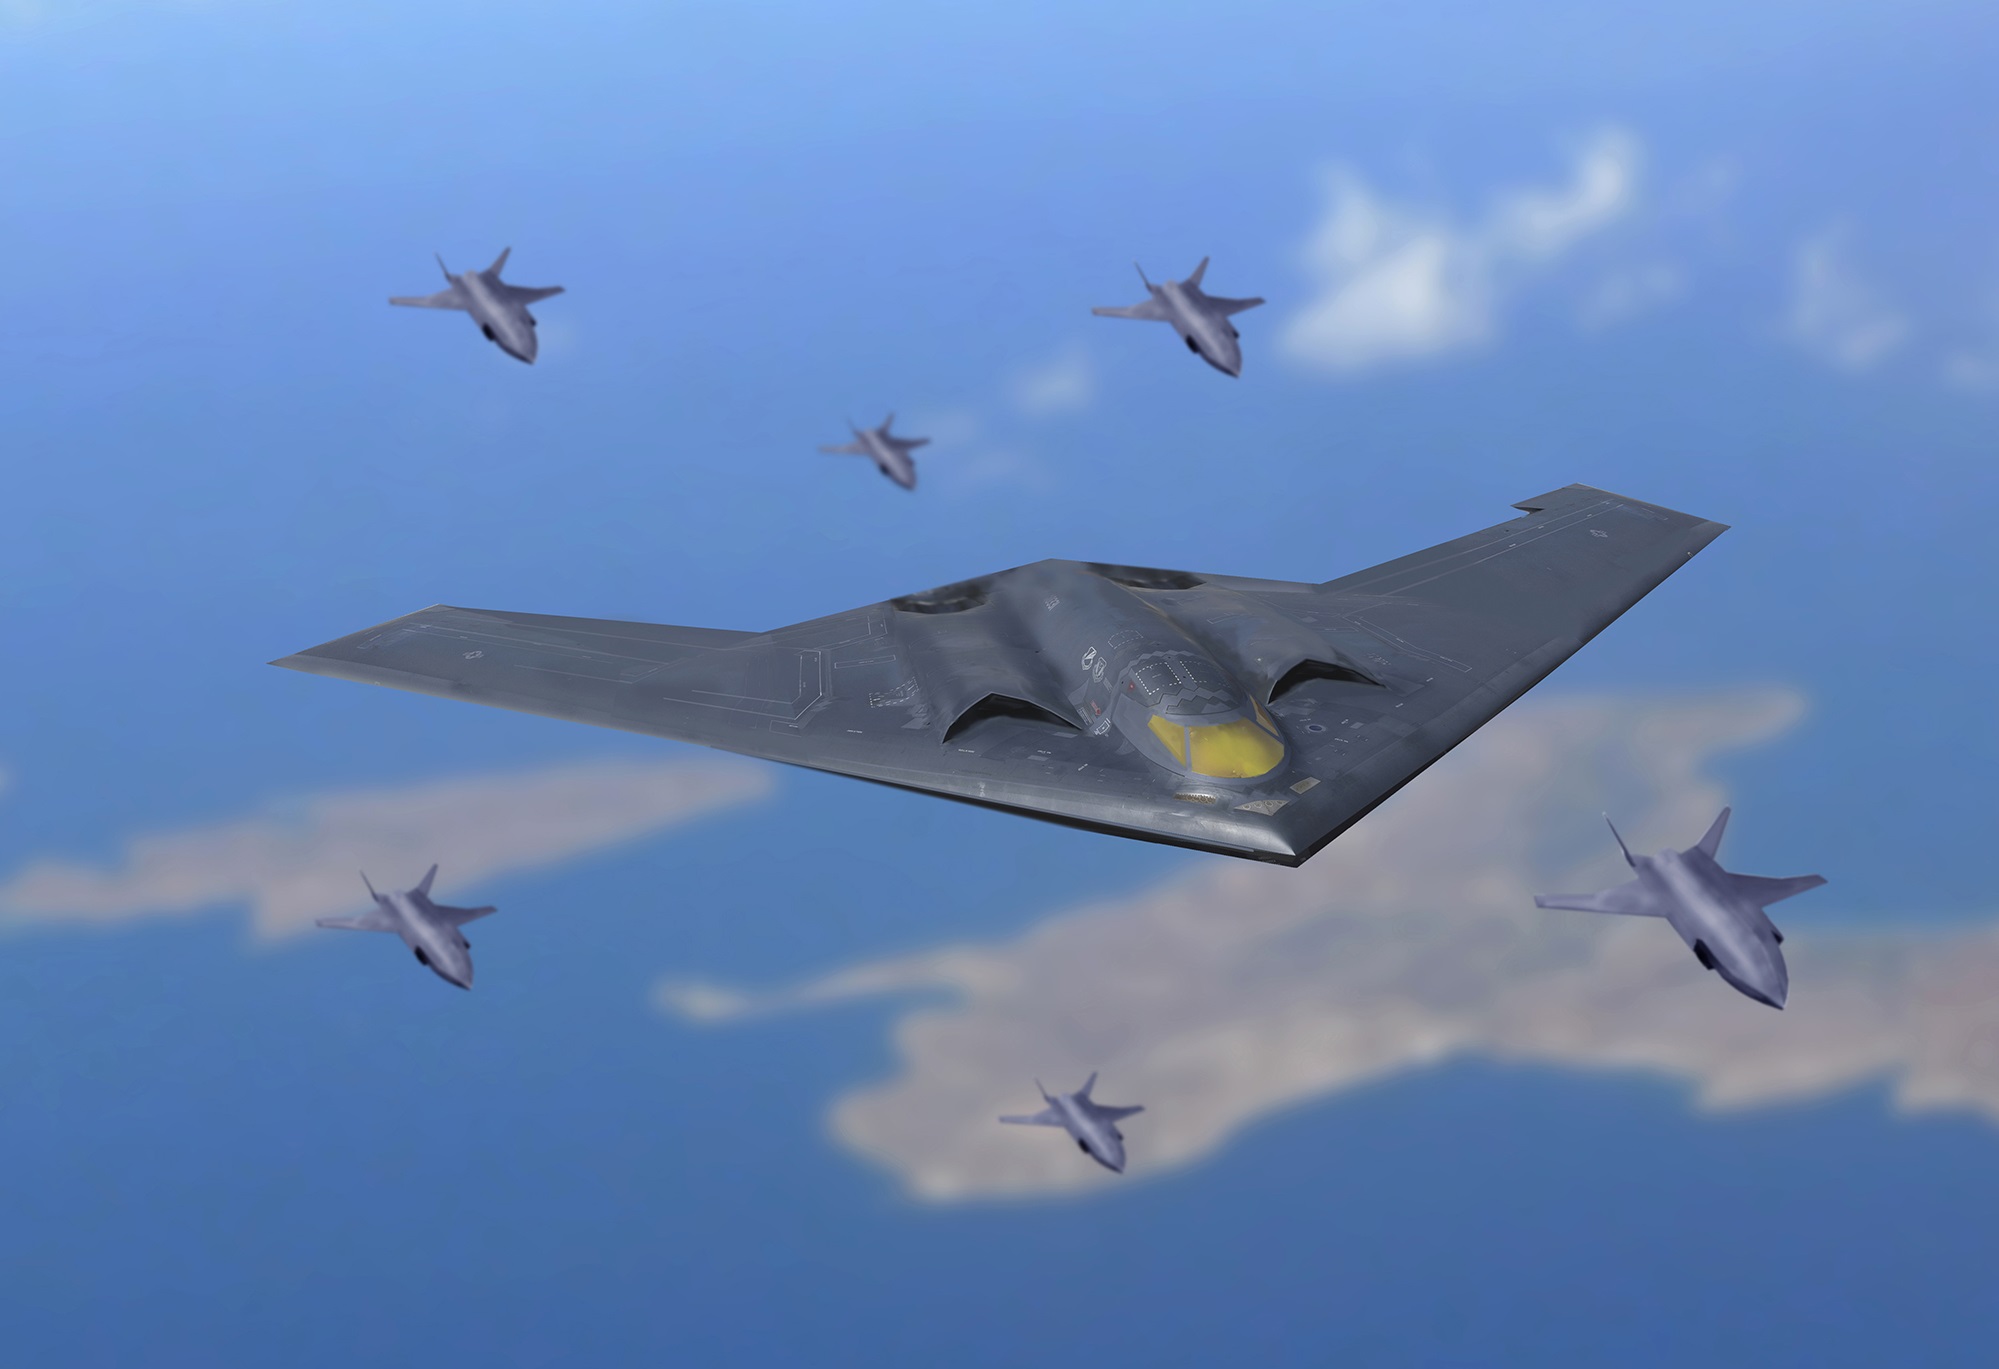 The $500 million B-21 Raider nuclear bomber will not receive an unmanned modification